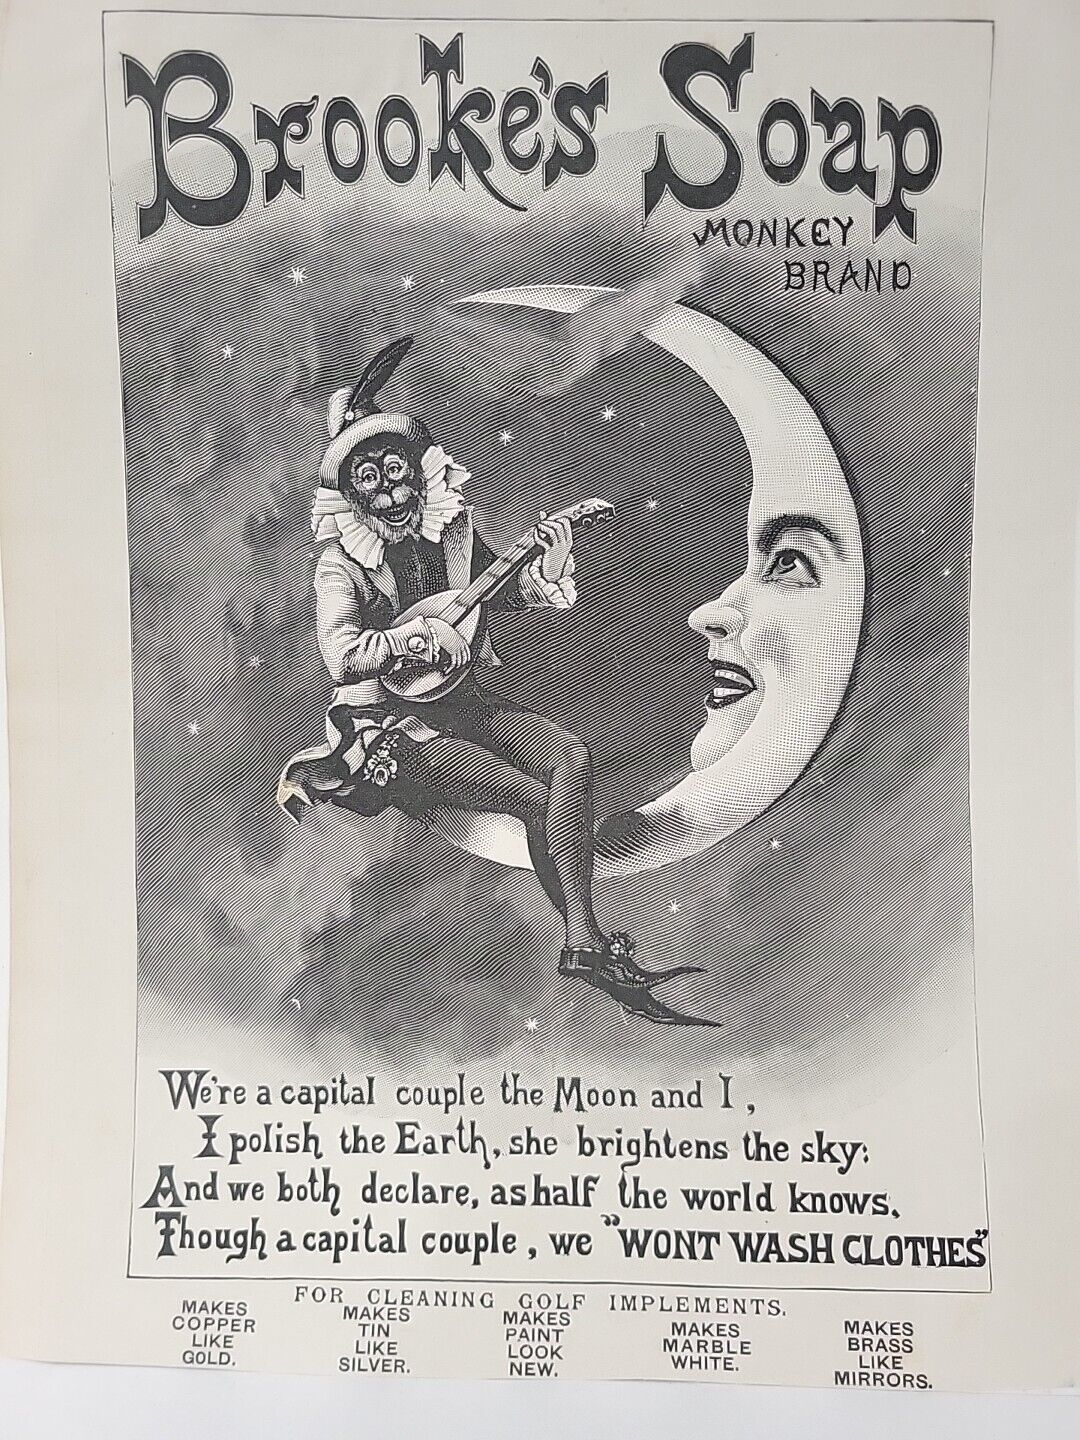 1891 Brooke's Soap Monkey Brand  Print Ad The Graphic Smiling Moon Minstrel Star